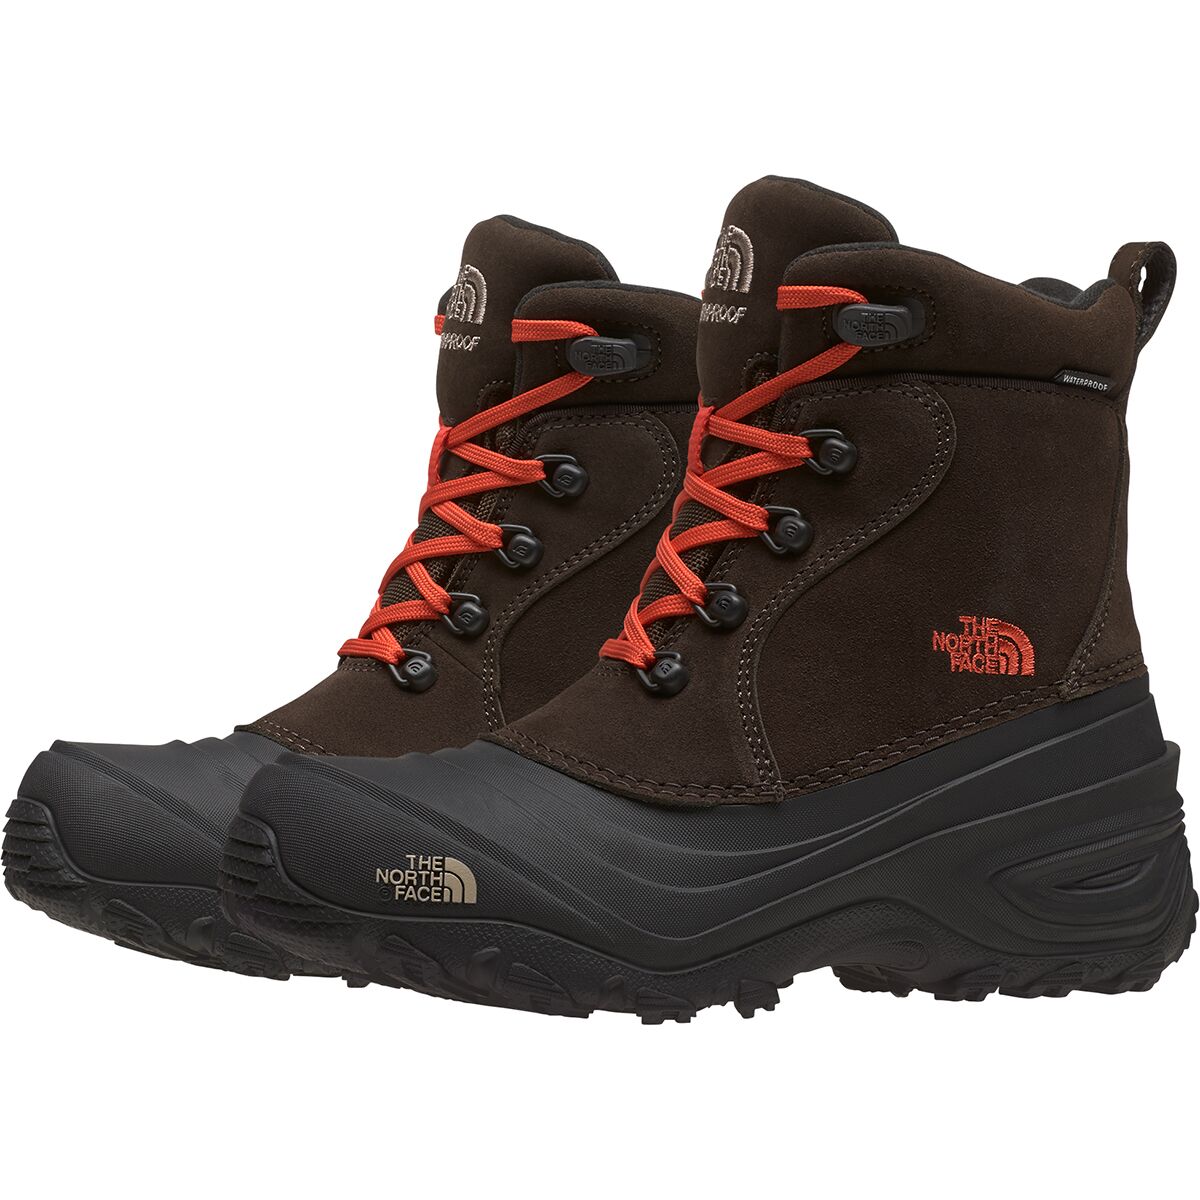 The North Face Chilkat II Boot - Boys 